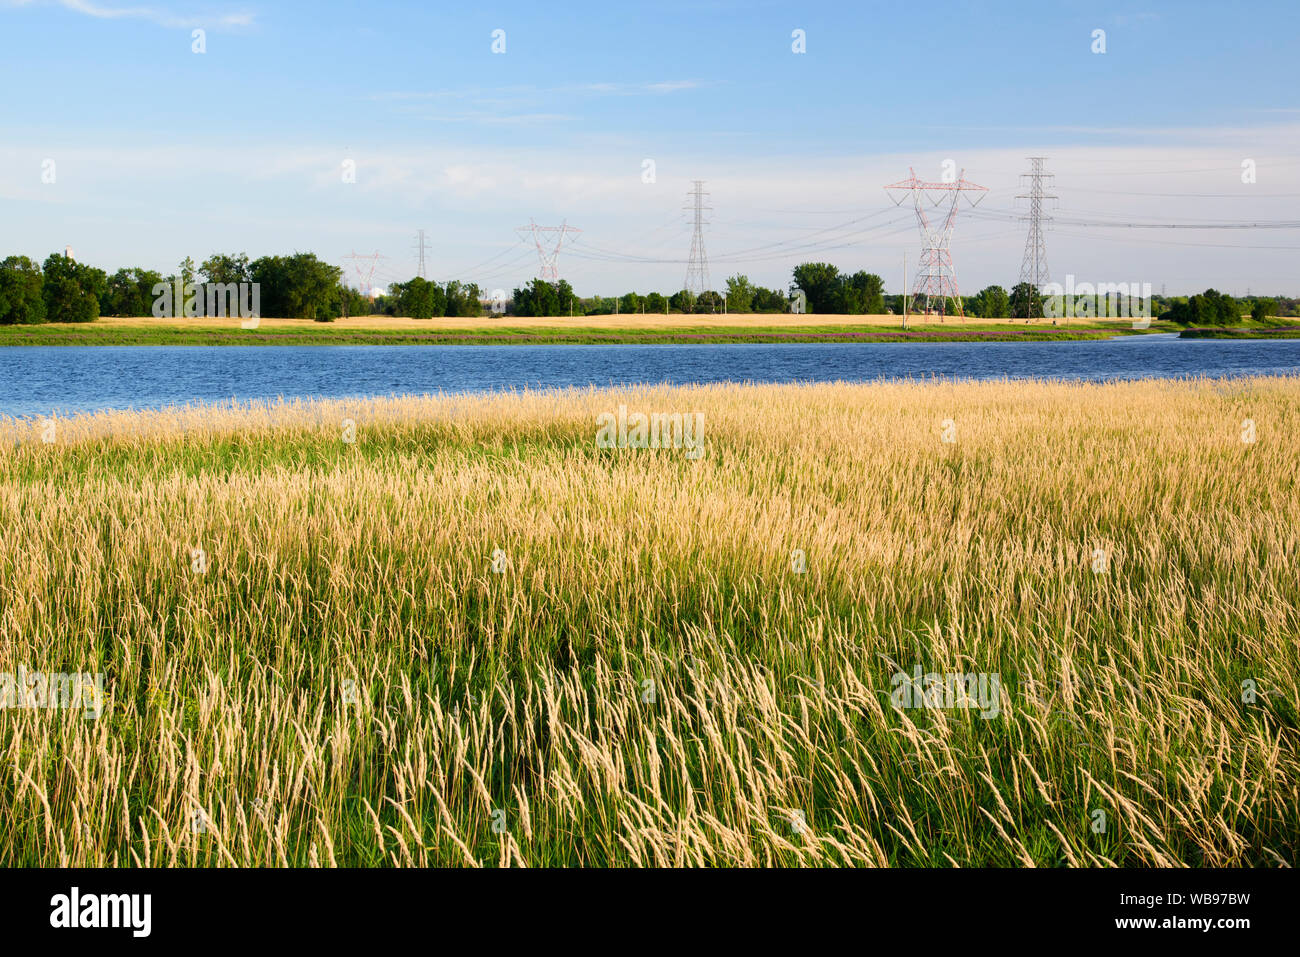 Riverbank of Rivière des Prairies covered with reed canary grass (phalaris arundinacea) with Hydro Québec powerlines in the background. Laval, Canada. Stock Photo